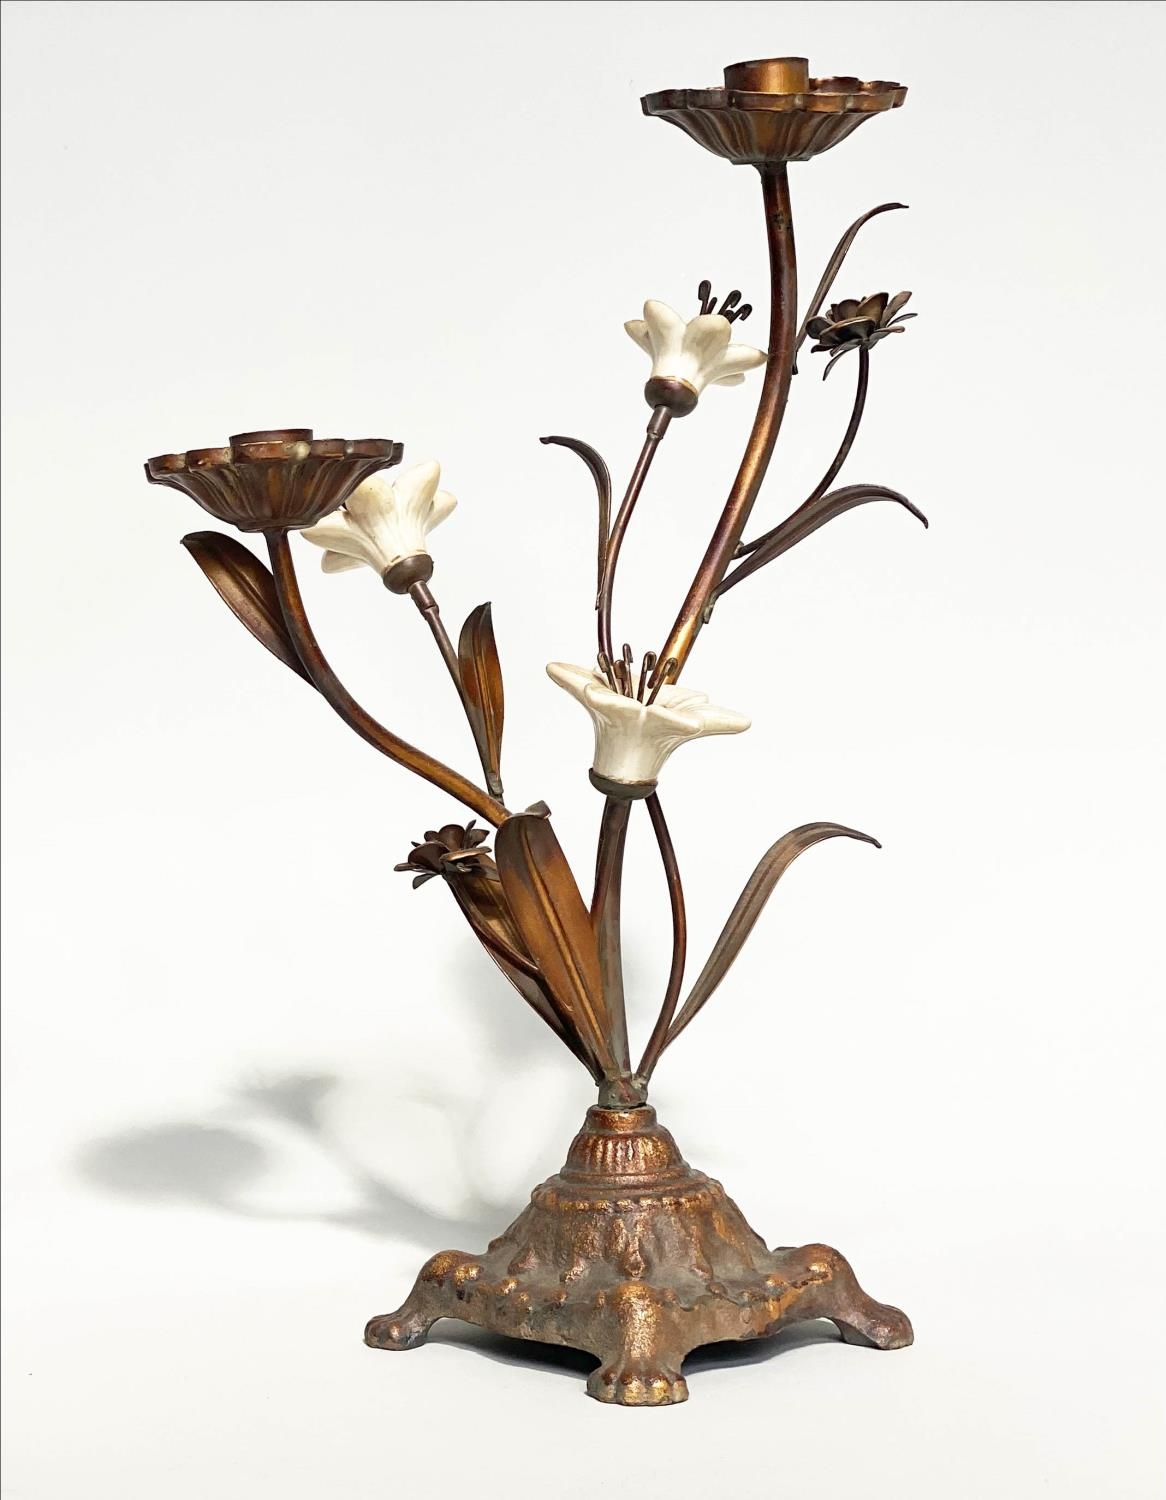 FLOWER CANDLESTICKS, a pair, Italian style cast bronzed metal with ceramic flower heads, 40cm H. (2) - Image 3 of 6